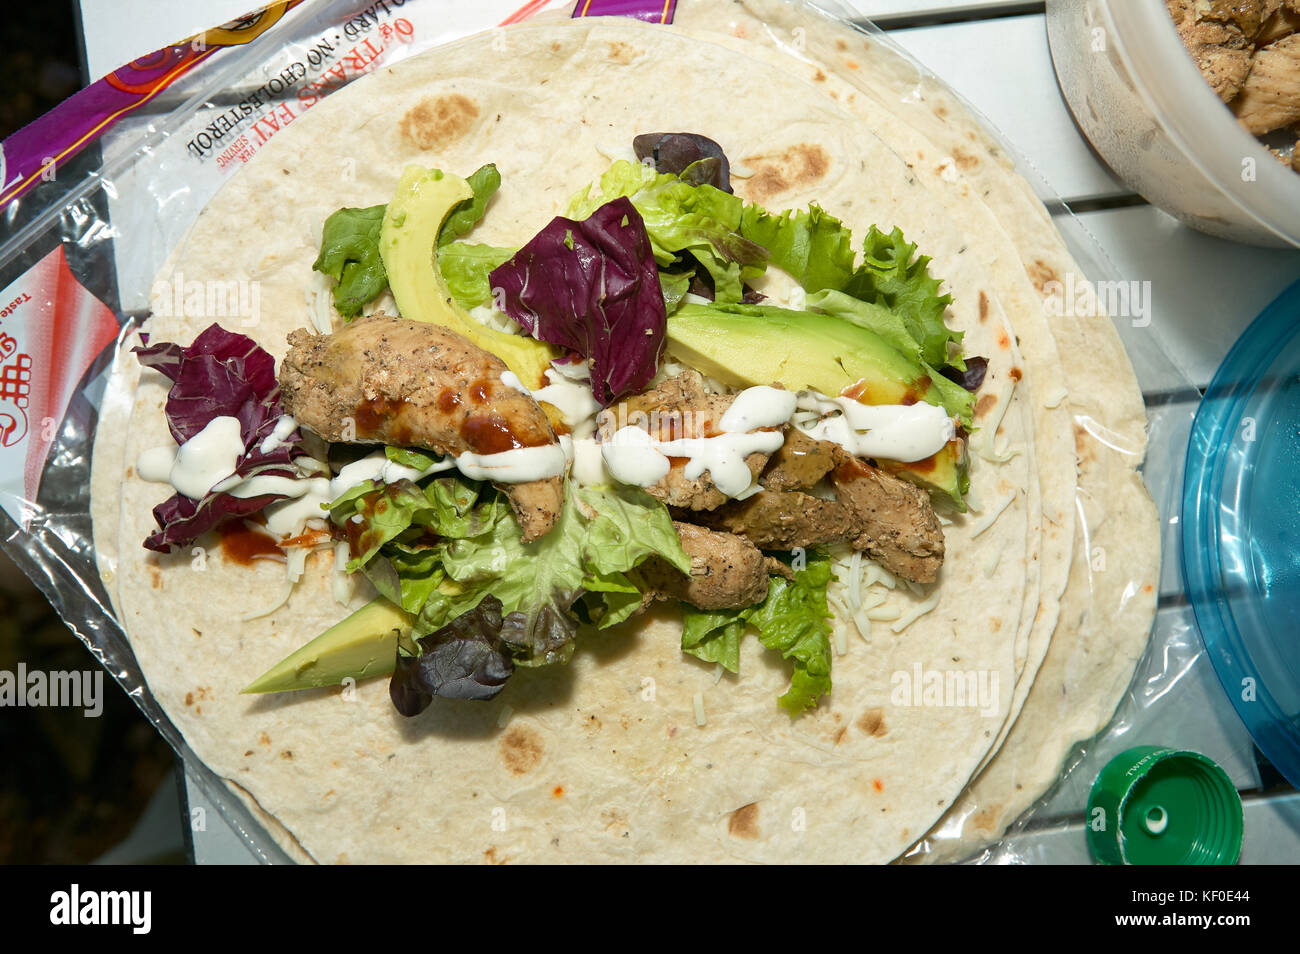 Ingredients for a corn tortilla or taco with meat mayonnaise, avocado pear lettuce and cabbage on prepackaged tortillas from a supermarket Stock Photo